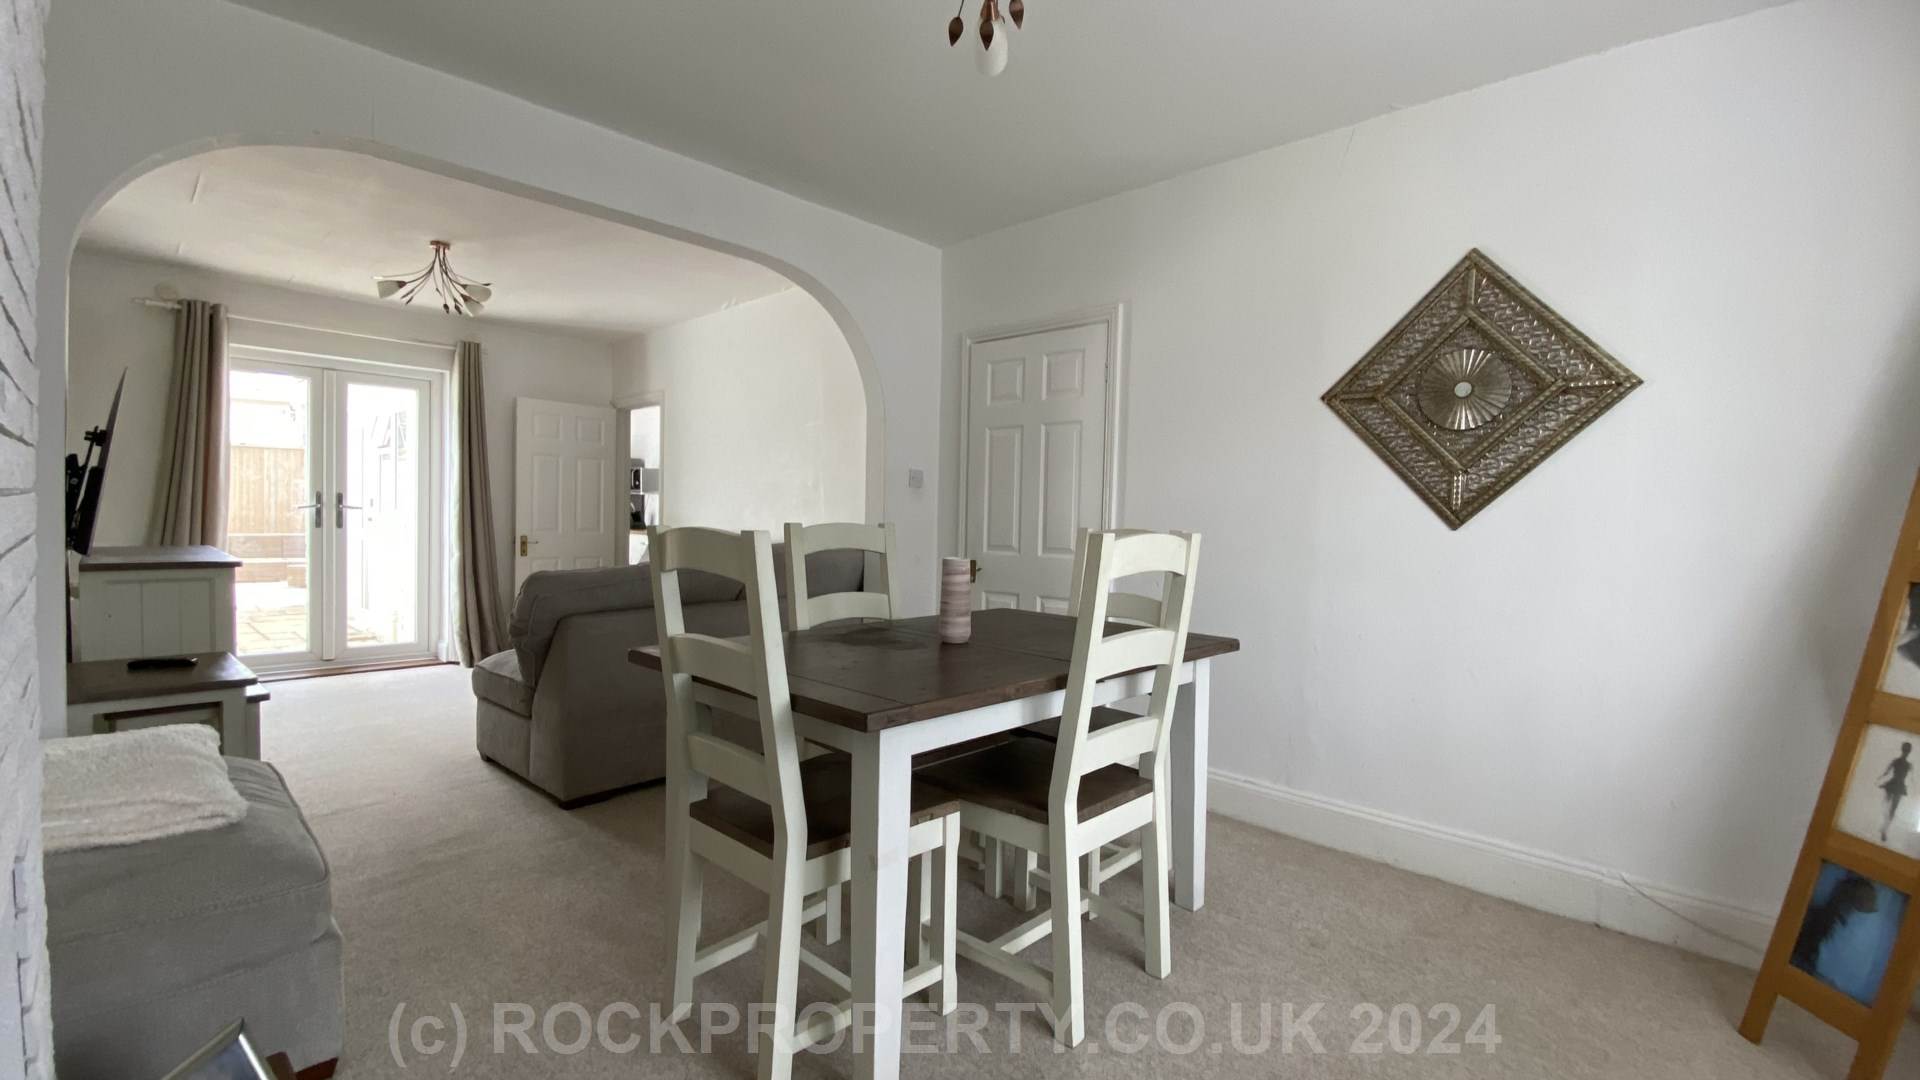 SOLE AGENT - 3 BED FAMILY HOME, La Chasse Brunet, St Saviour, Image 7